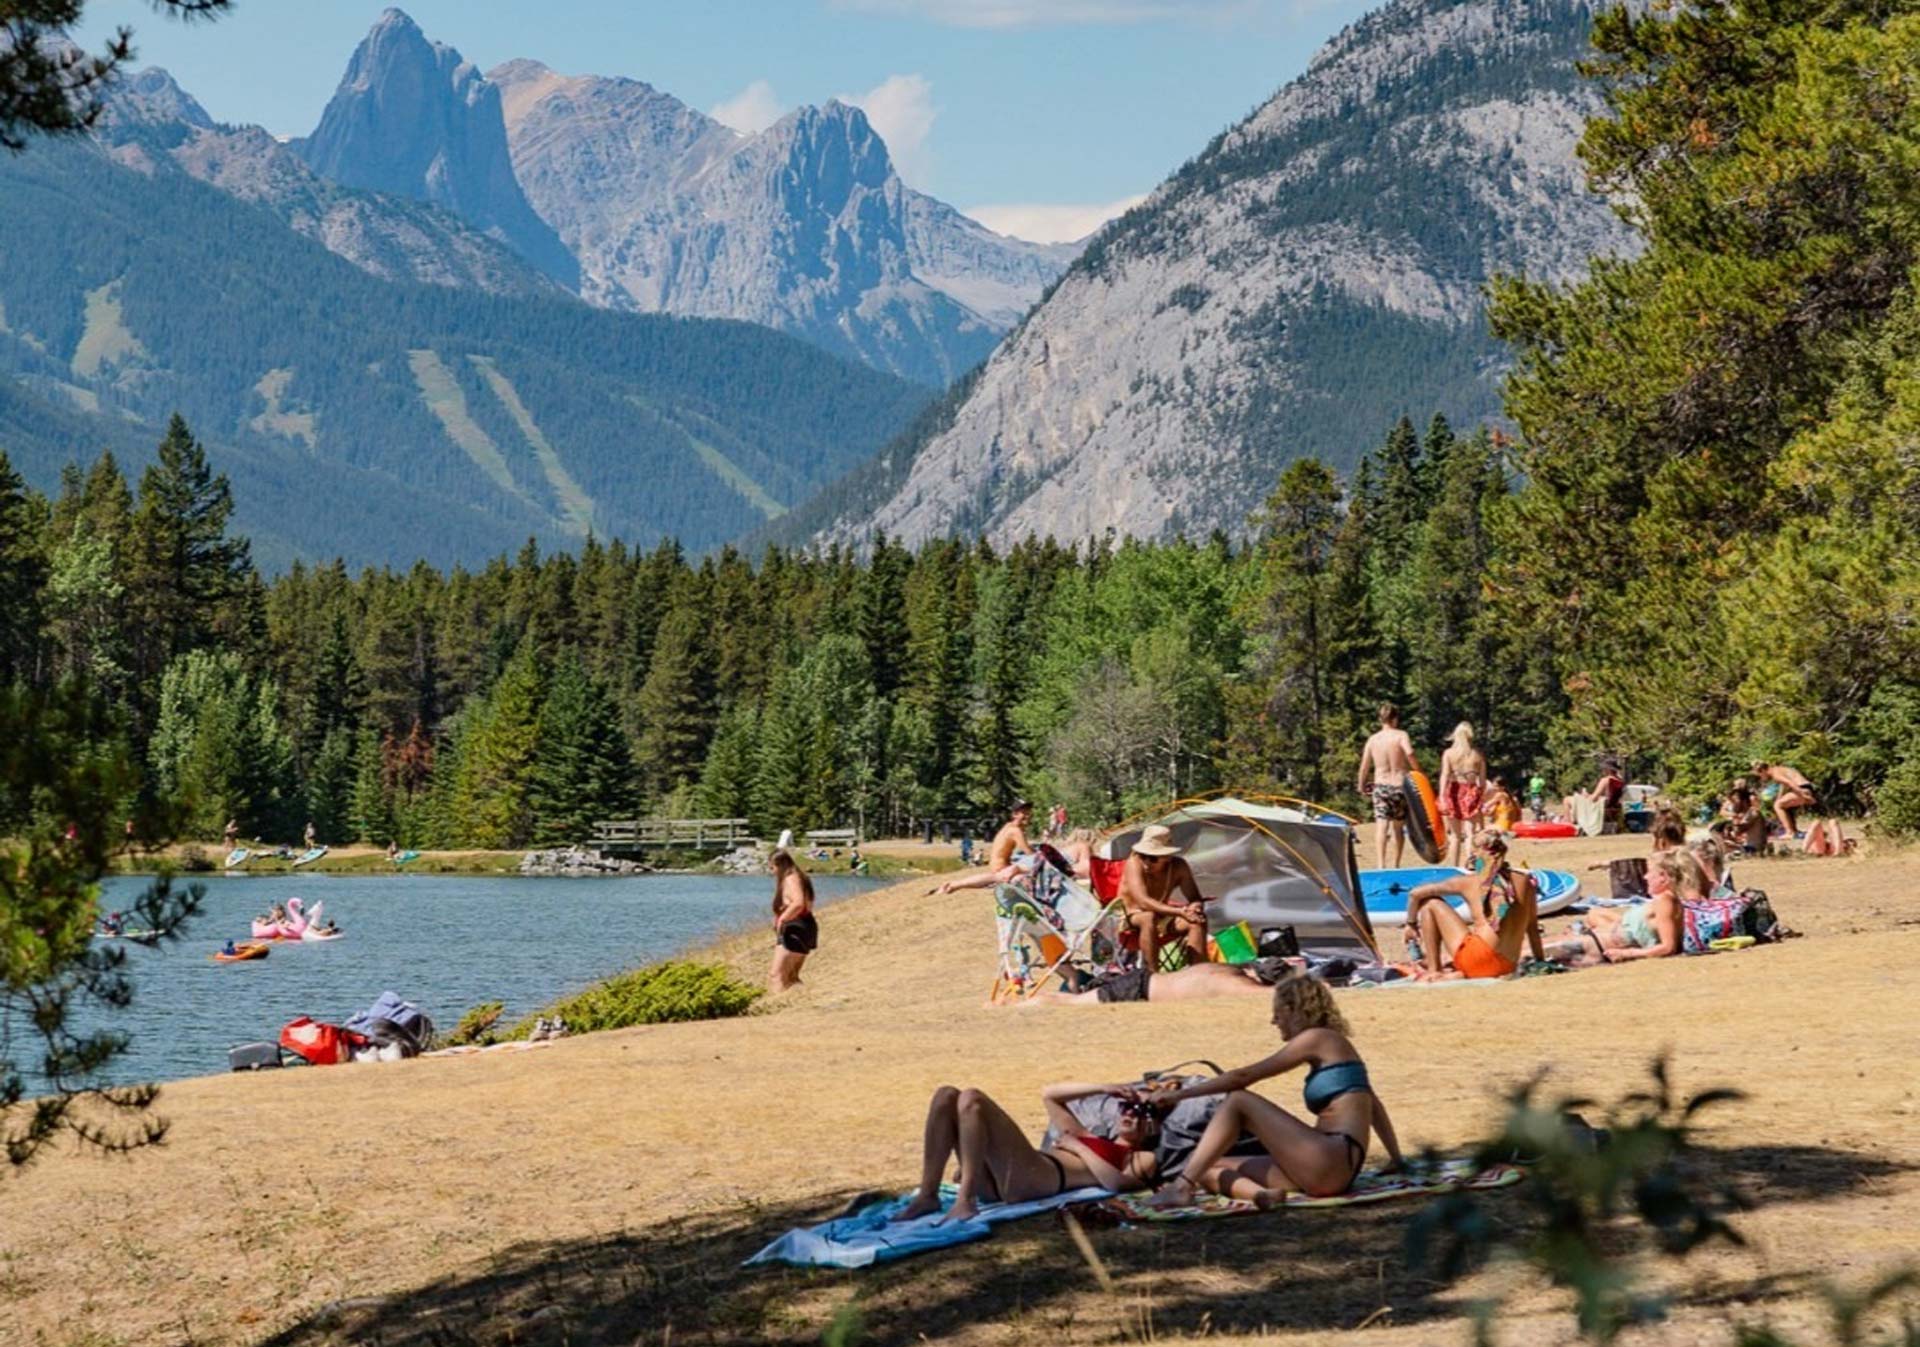 People hanging out on the beach at Johnson Lake, Banff